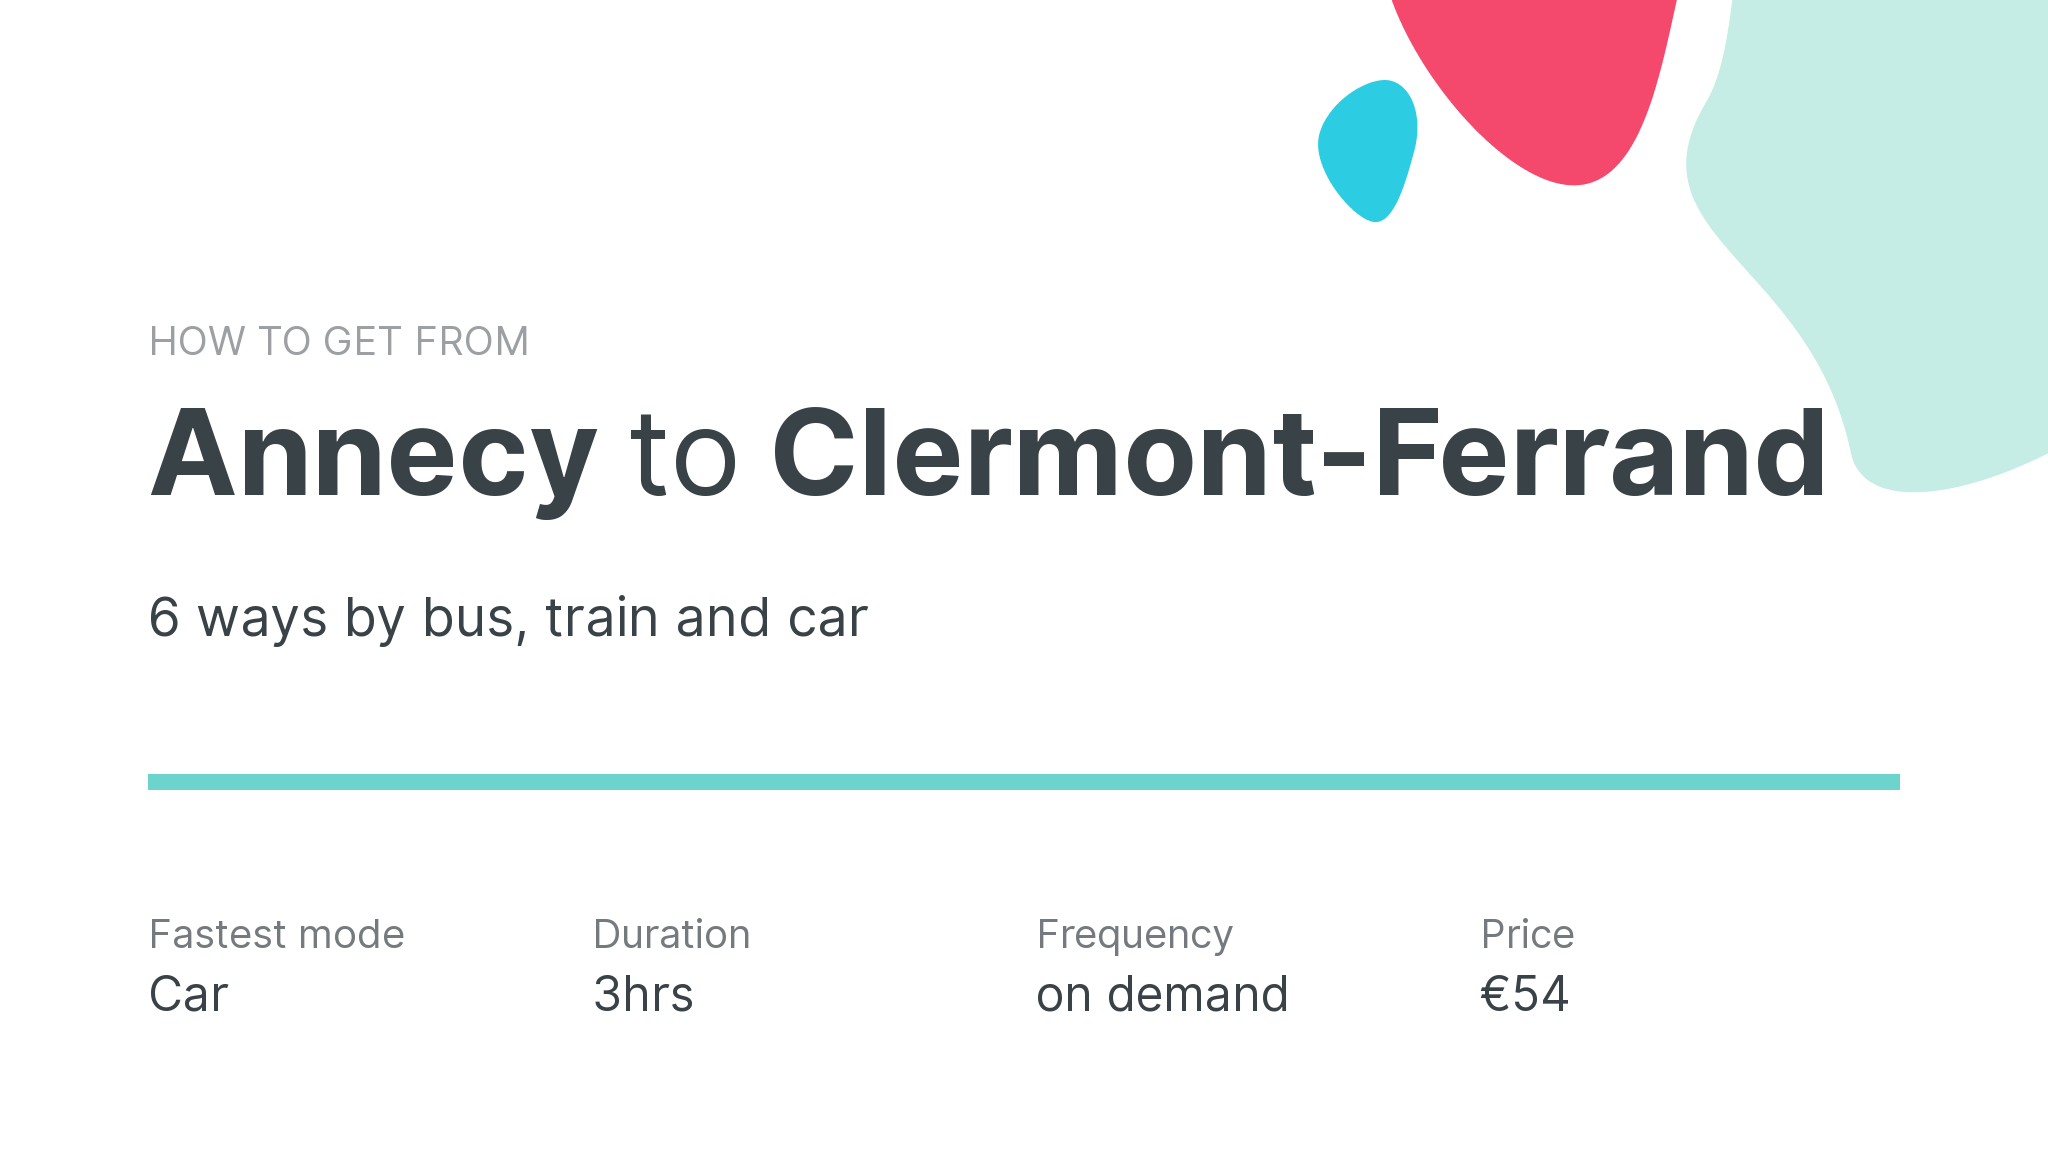 How do I get from Annecy to Clermont-Ferrand